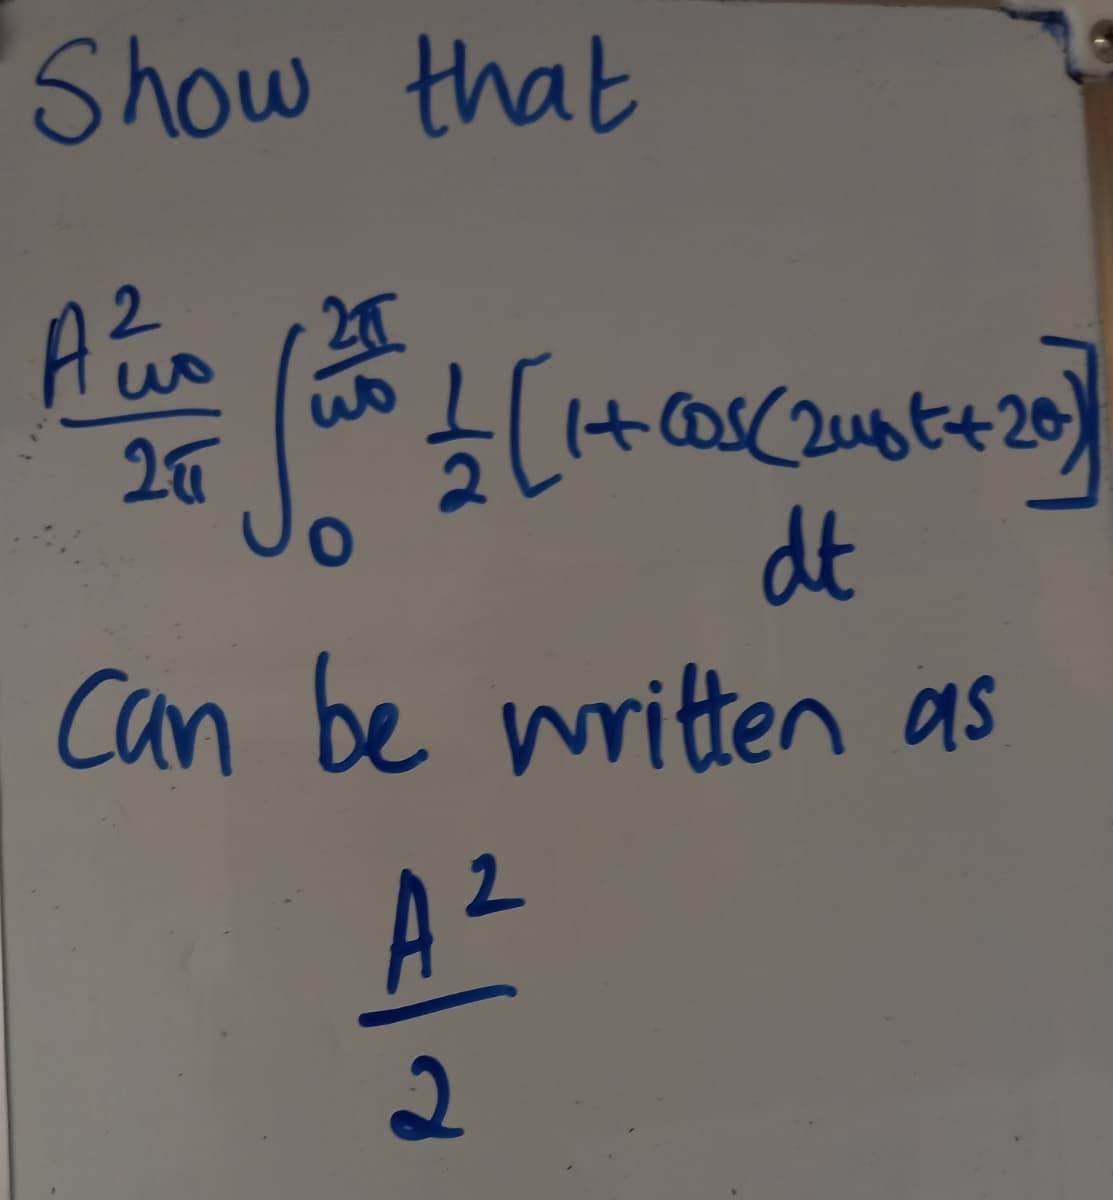 Show that
2.
dt
Can be written as
A2
